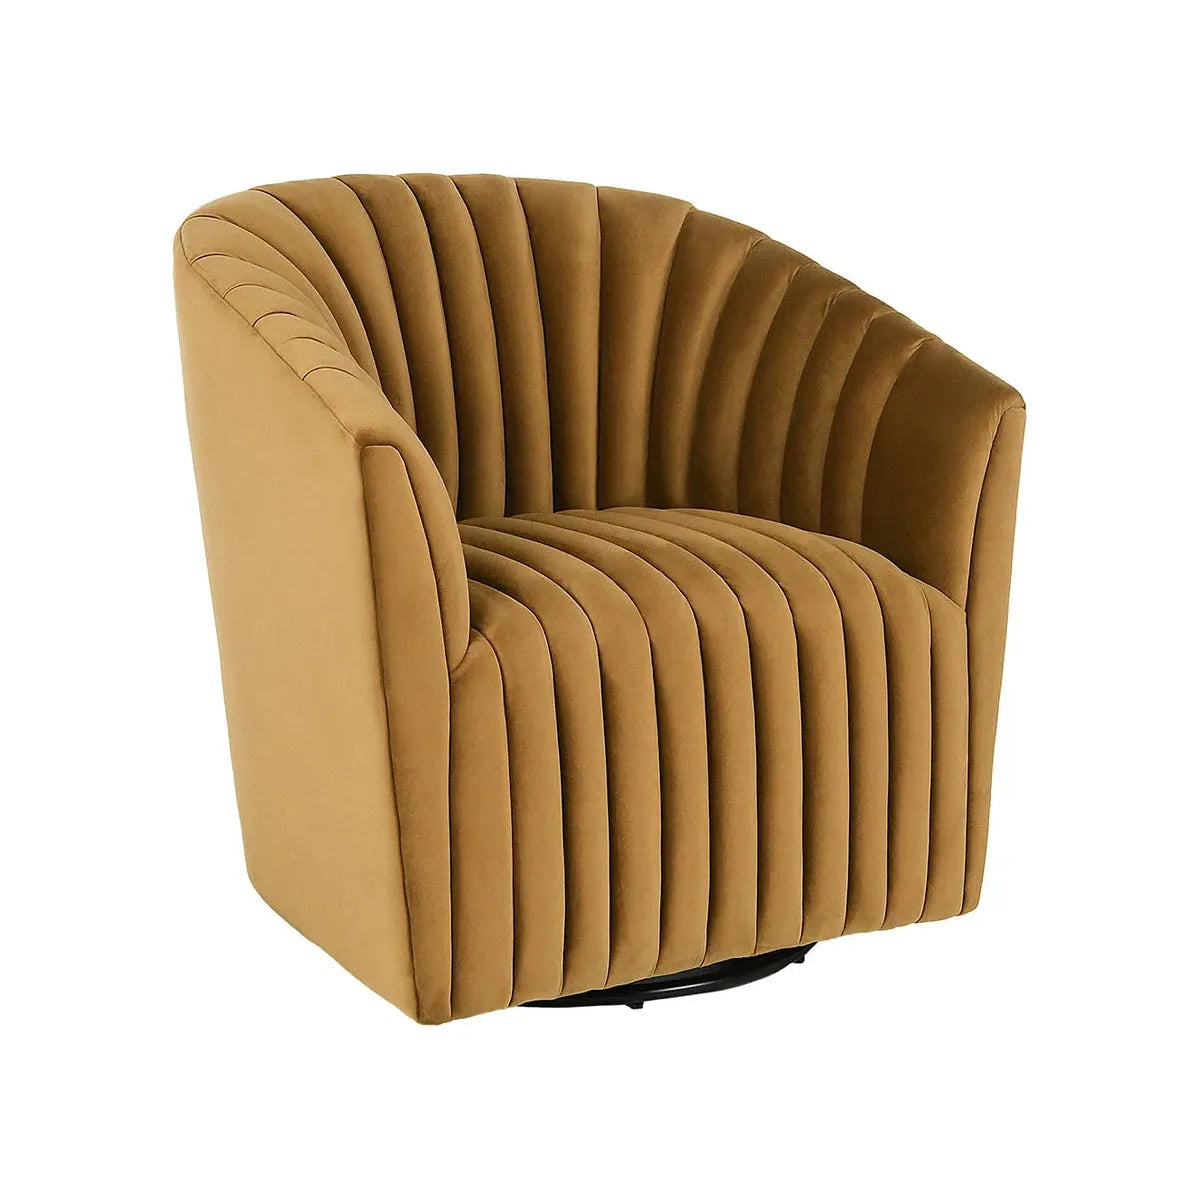 A modern, Adaline Swivel Accent Chair with vertical channel tufting on its back and sides, isolated on a white background. The chair has a round, plush seat and a low profile design.